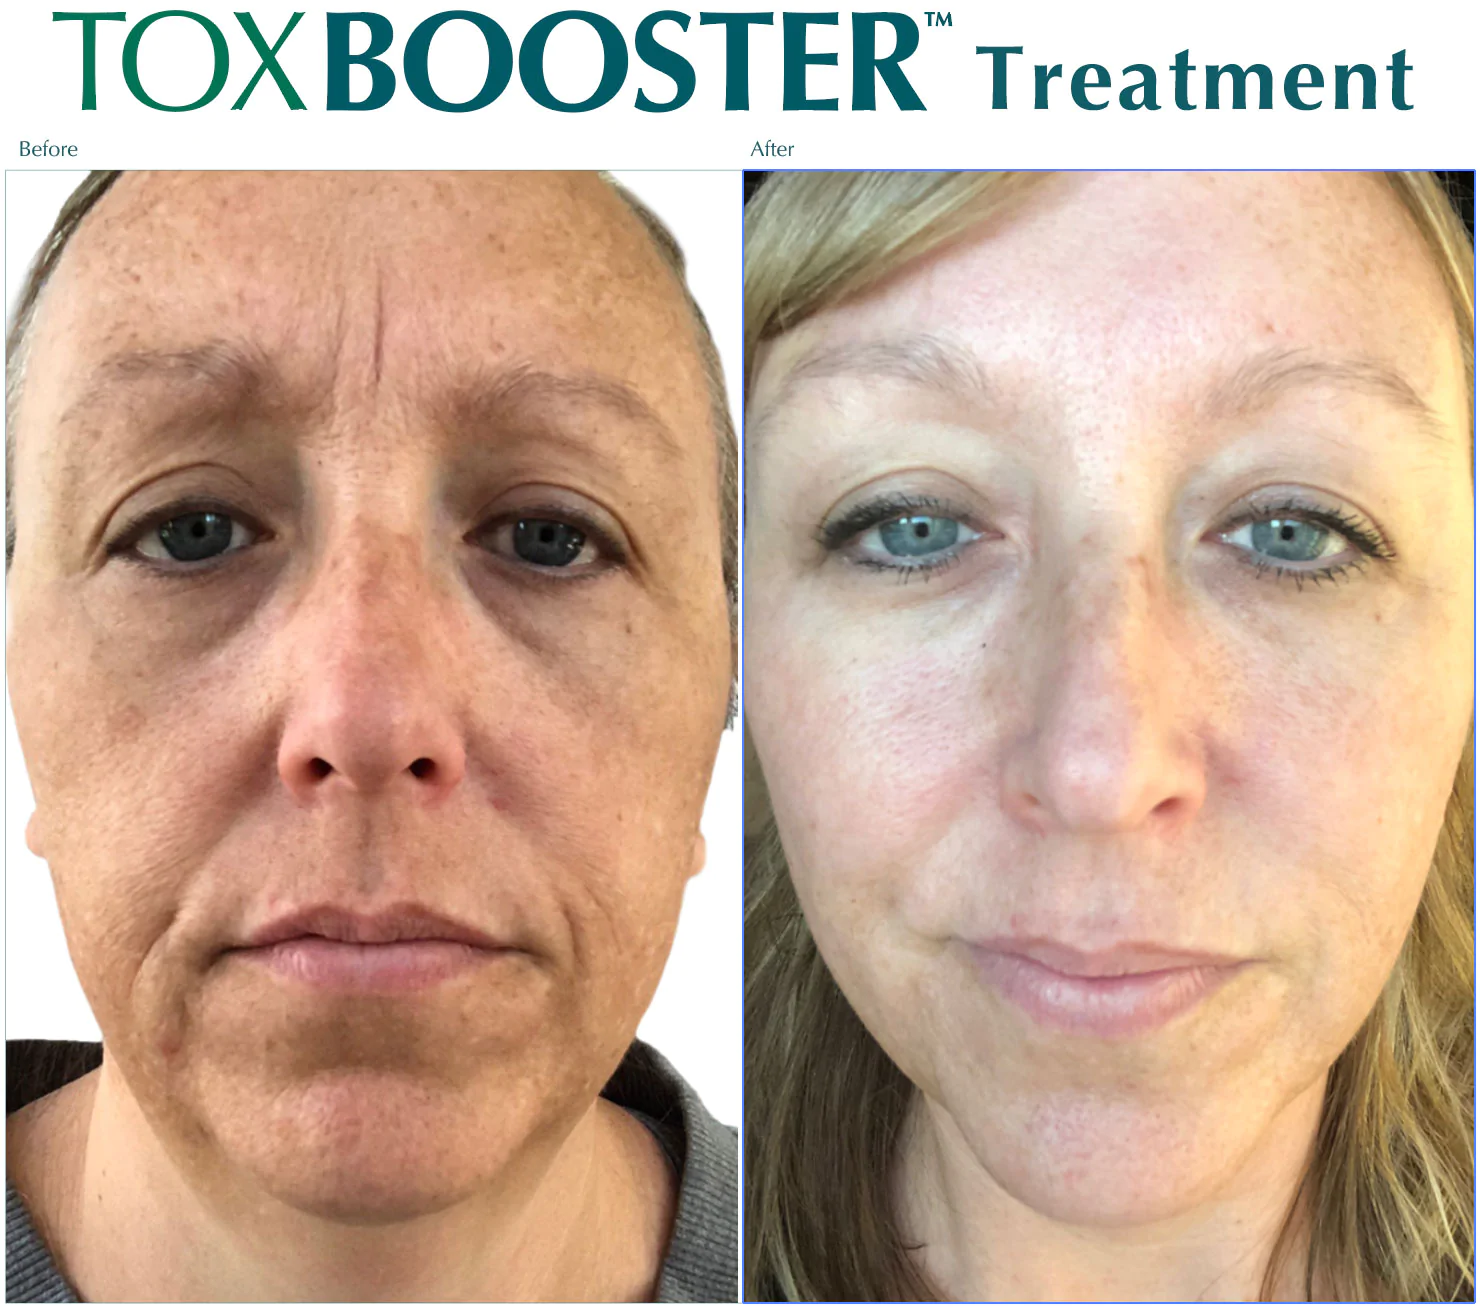 Before and After Toxbooster Treatment